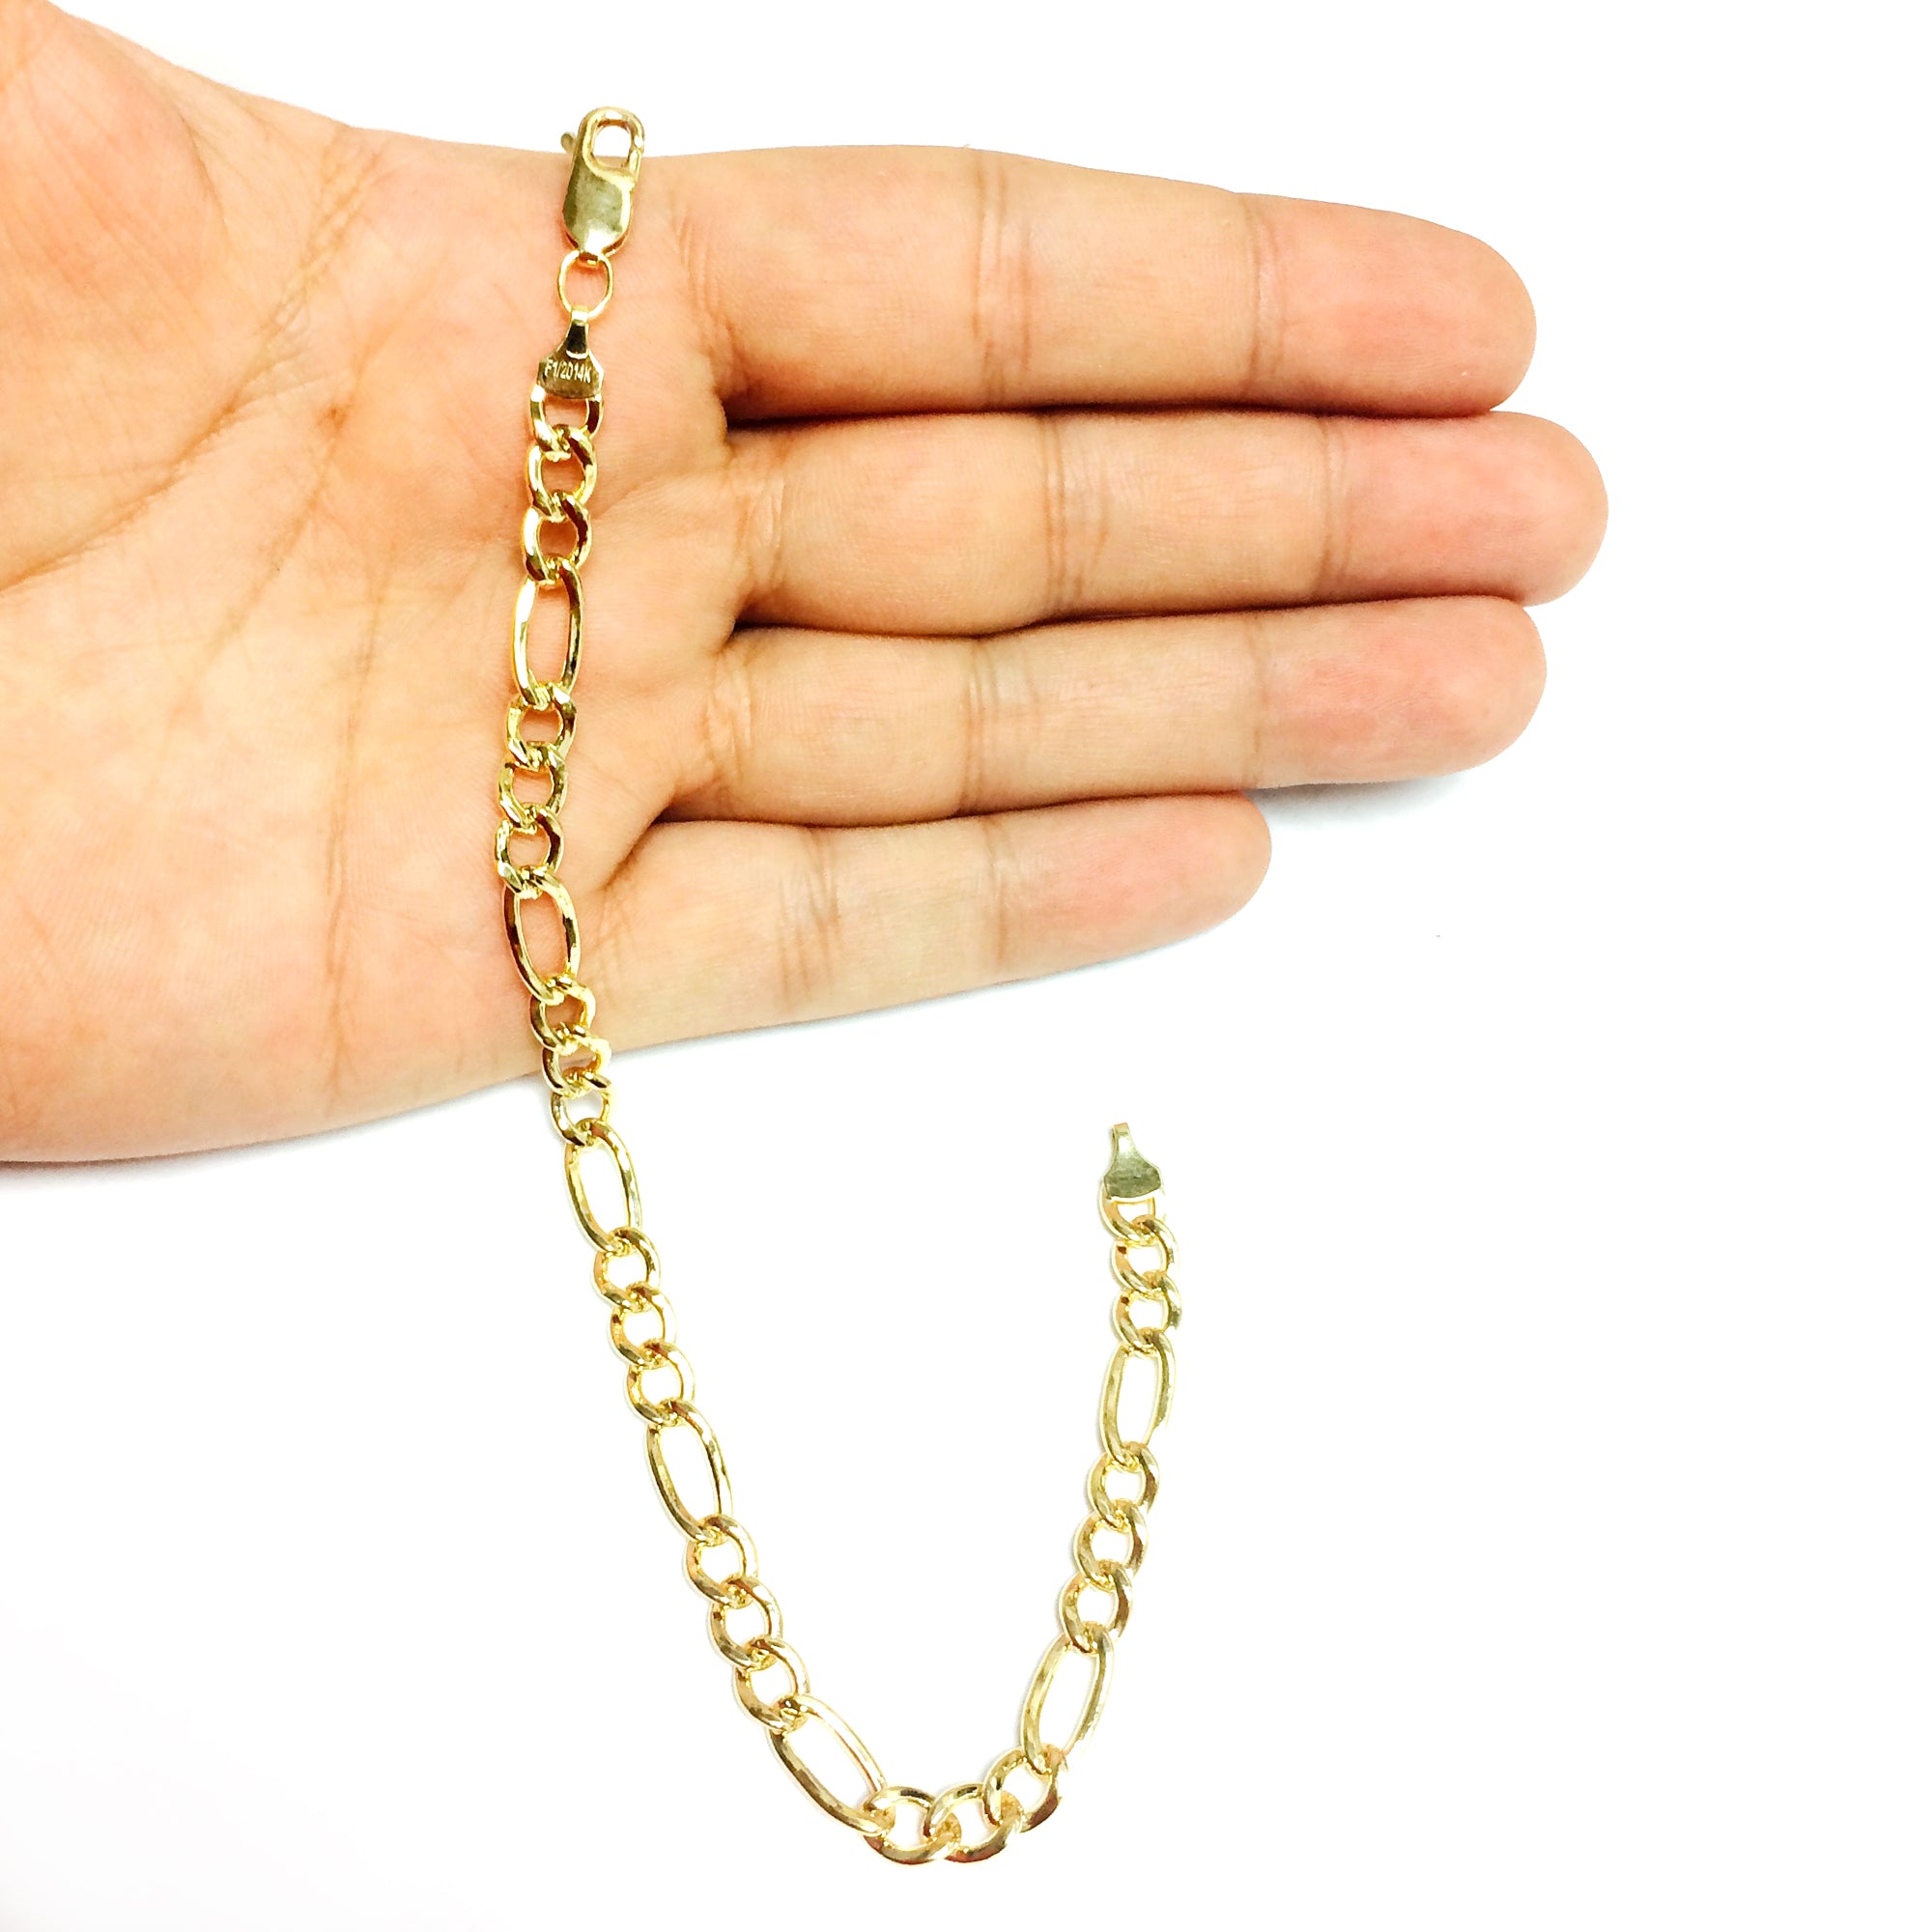 14K Yellow Gold Filled Solid Figaro Chain Bracelet, 6.0 mm, 8.5" fine designer jewelry for men and women